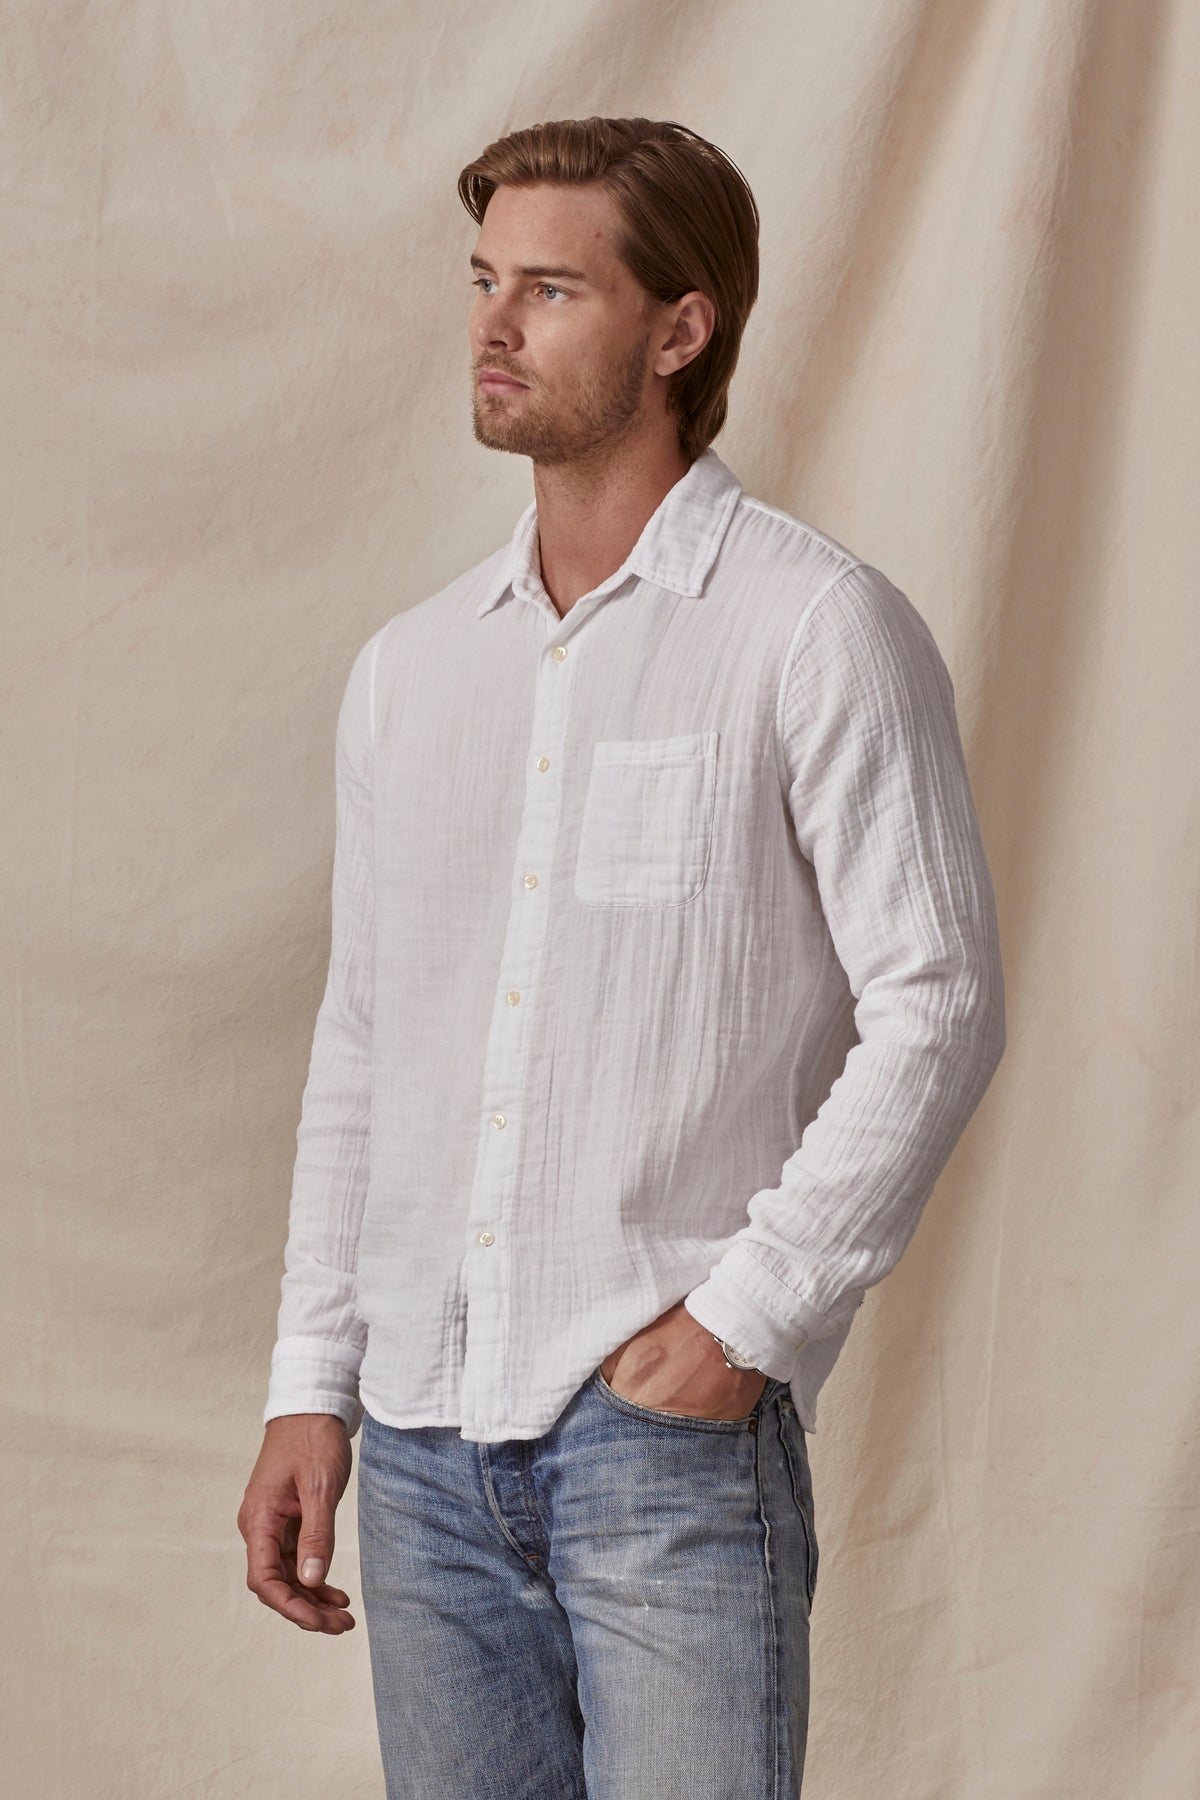 A man wearing casual jeans and an ELTON BUTTON-UP SHIRT by Velvet by Graham & Spencer, made of cotton gauze.-36009391849665